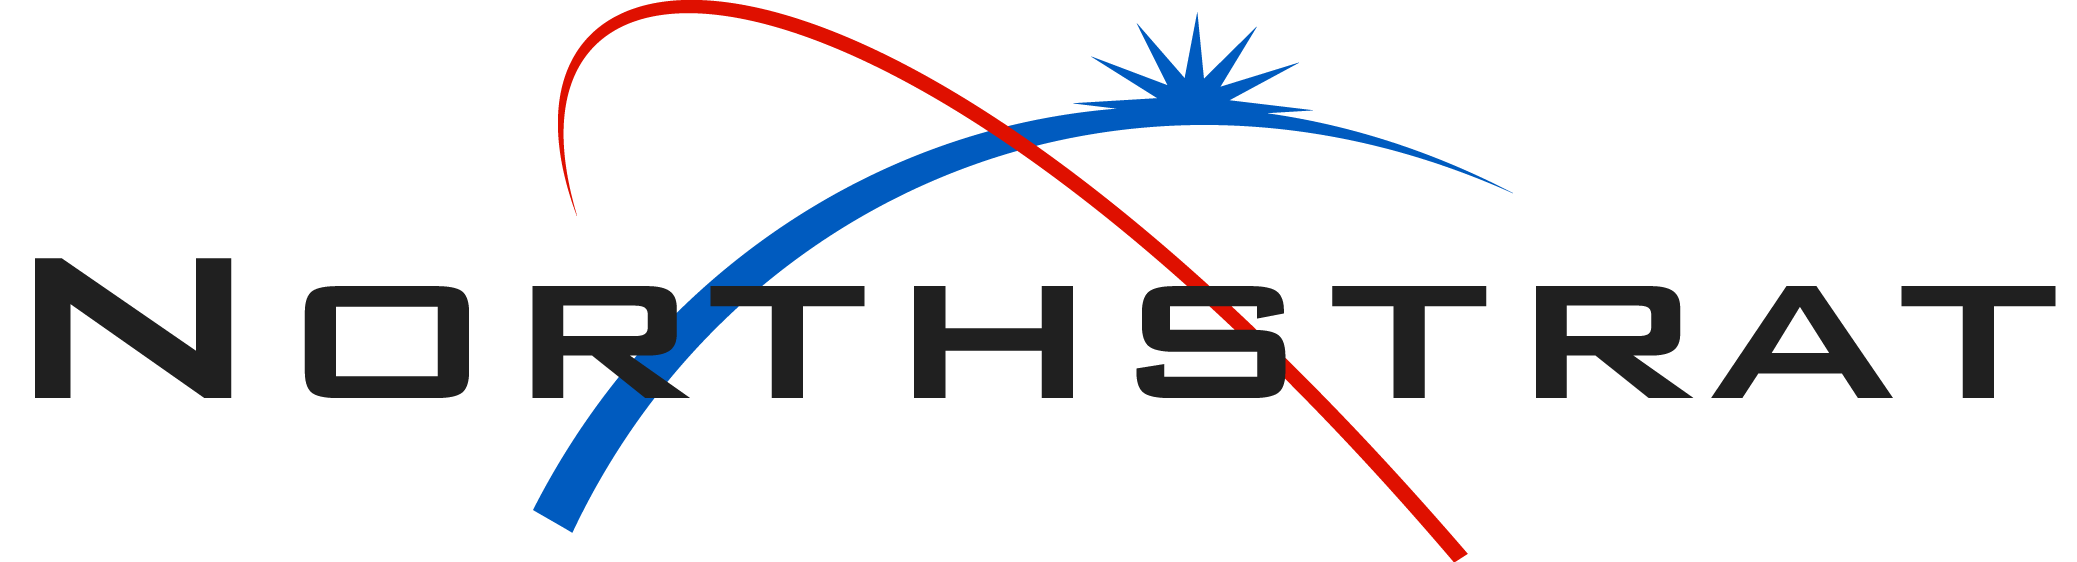 Northstrat Incorporated logo